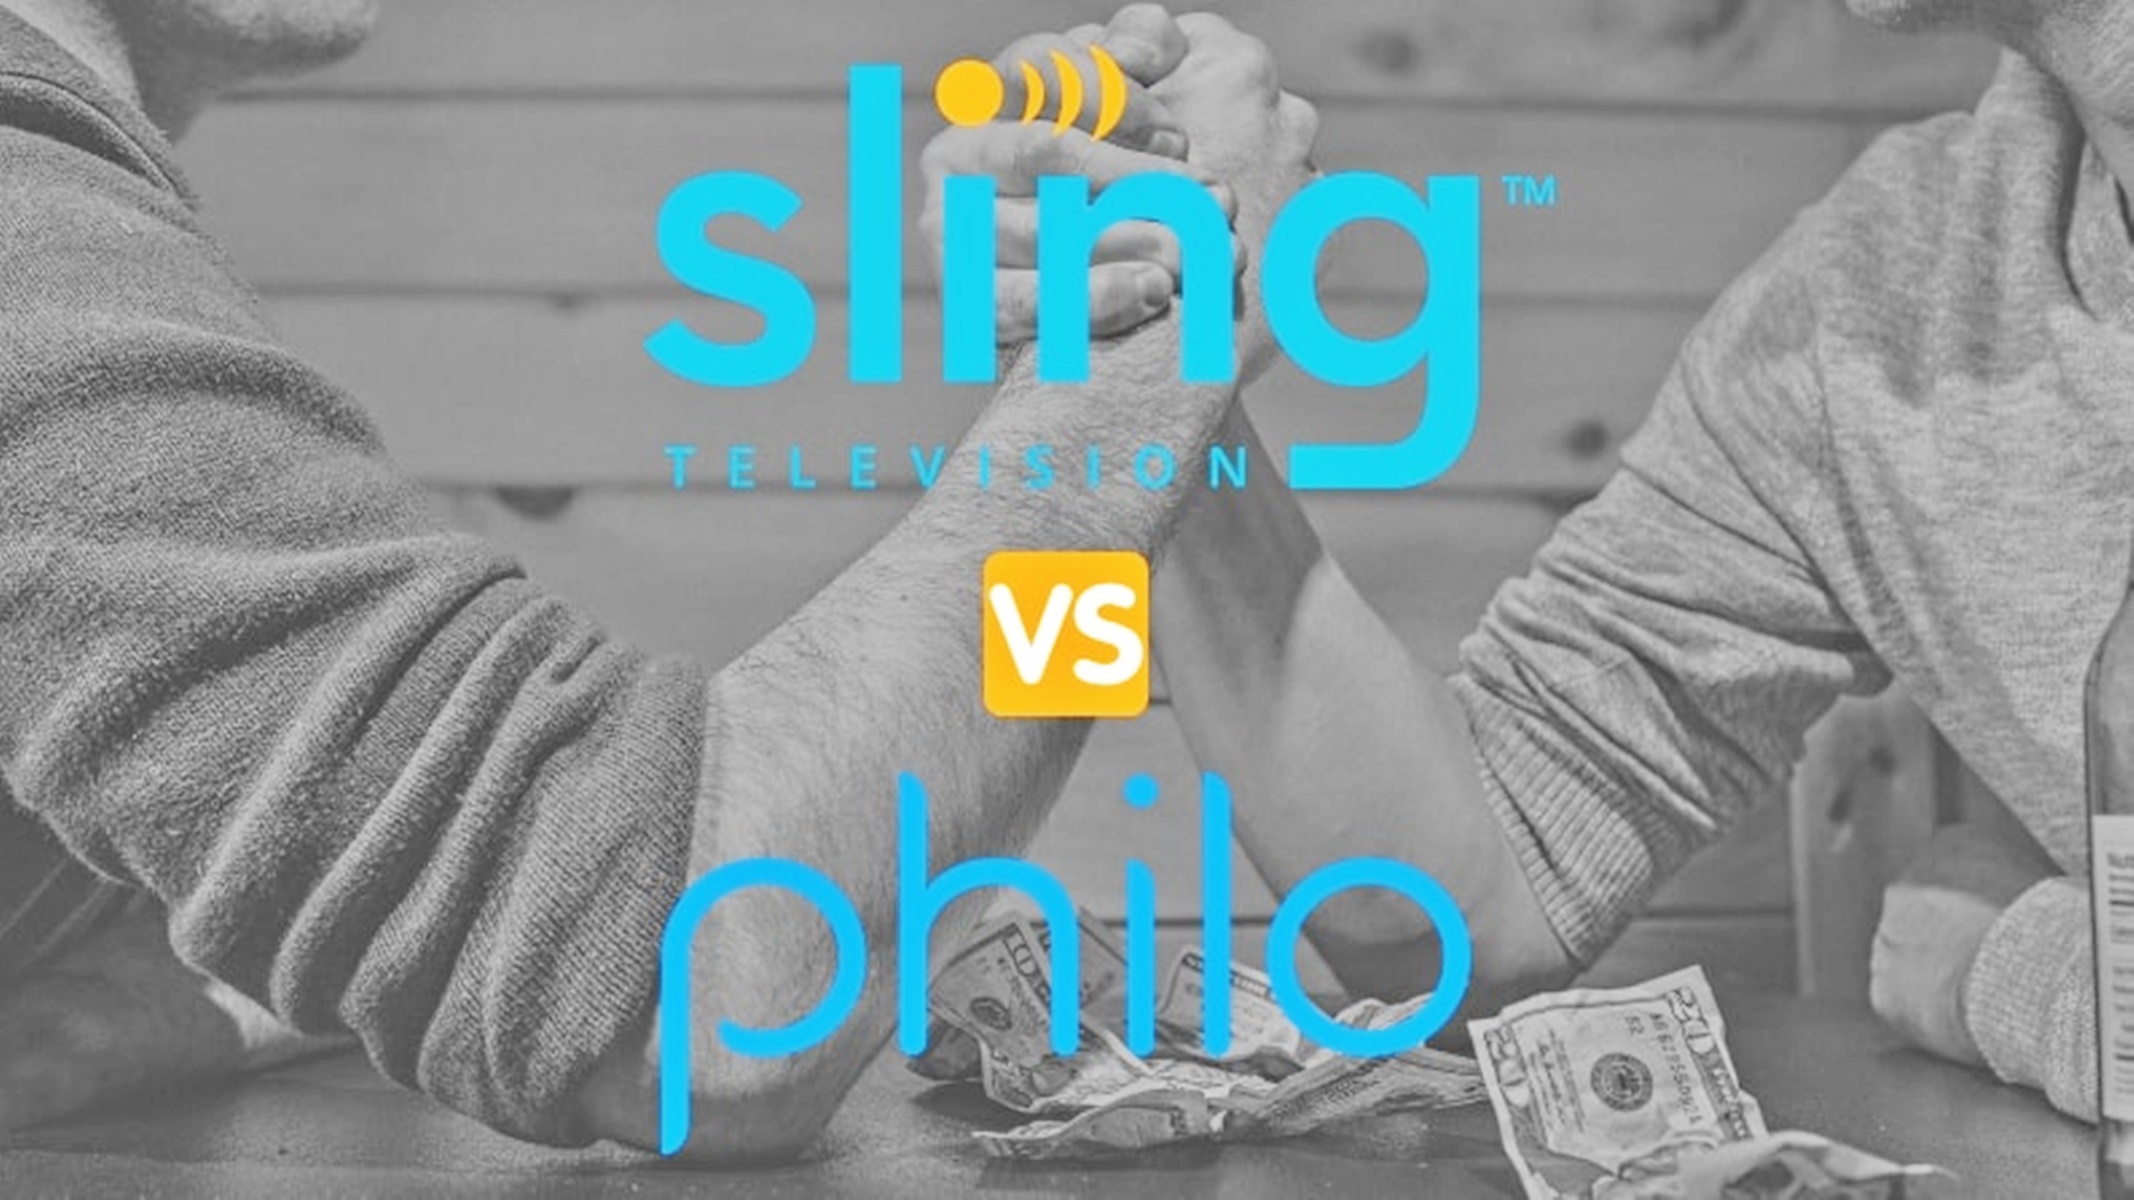 Sling TV Vs. Philo: What’s The Difference?